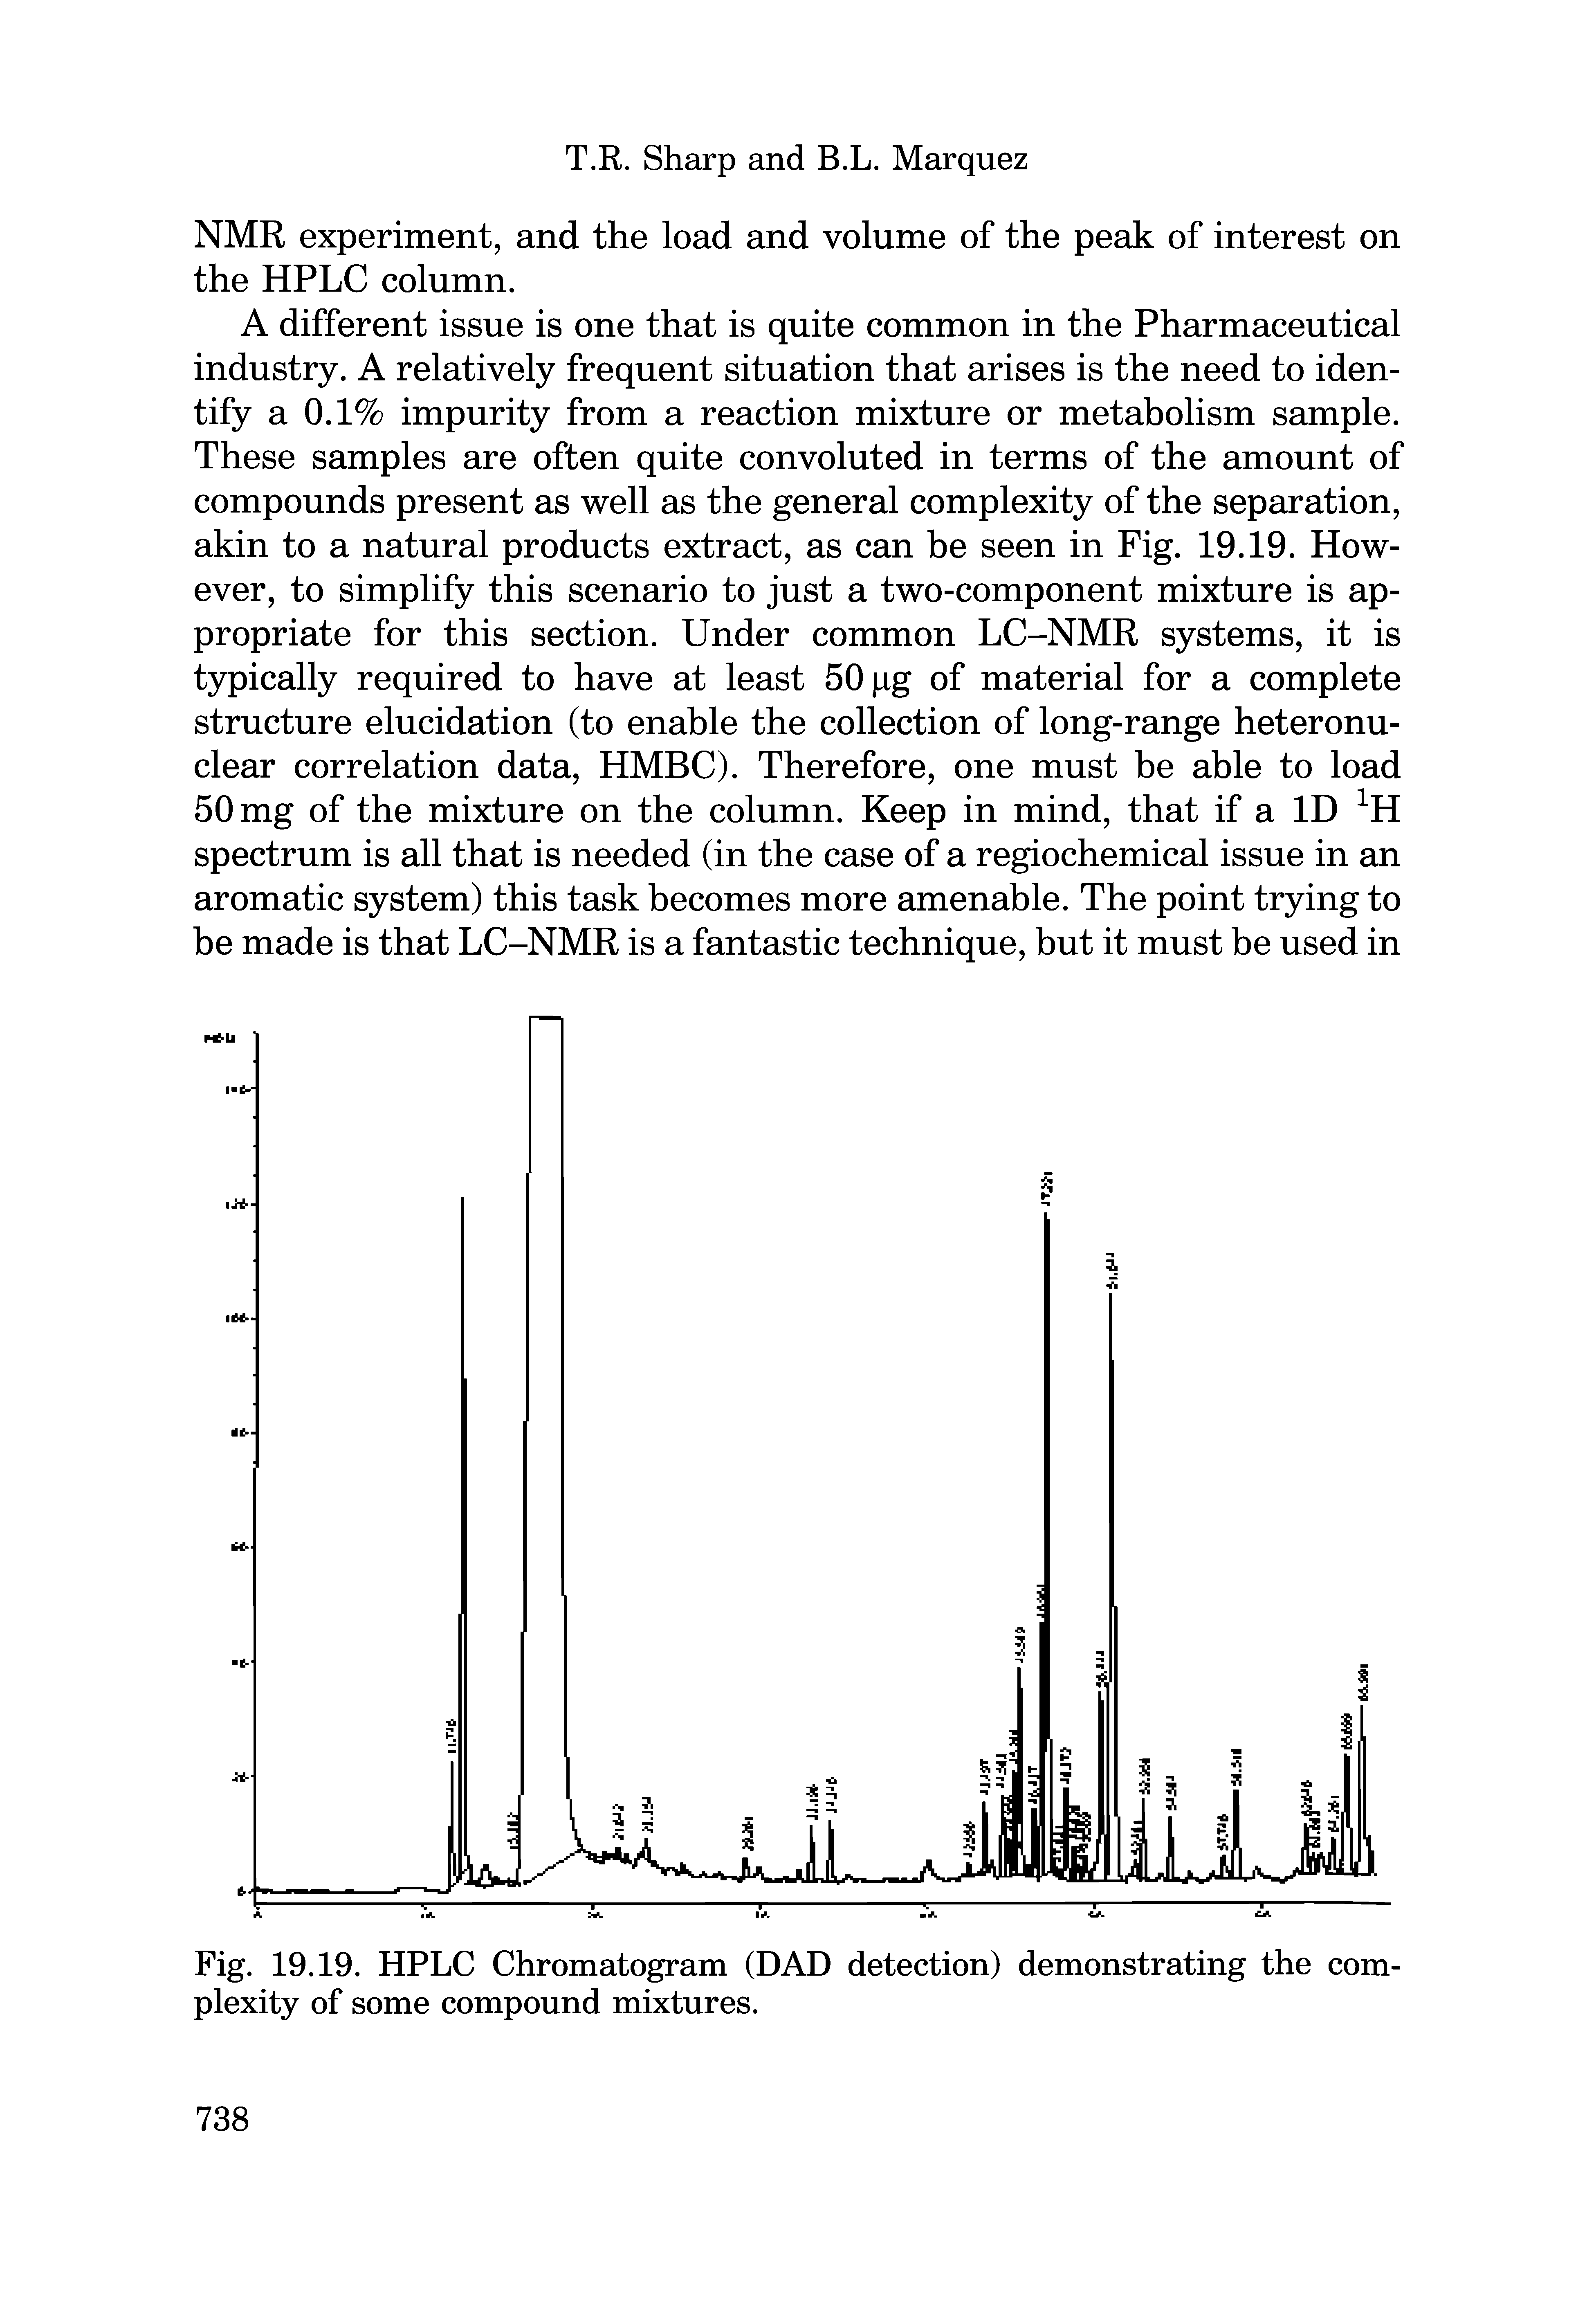 Fig. 19.19. HPLC Chromatogram (DAD detection) demonstrating the complexity of some compound mixtures.